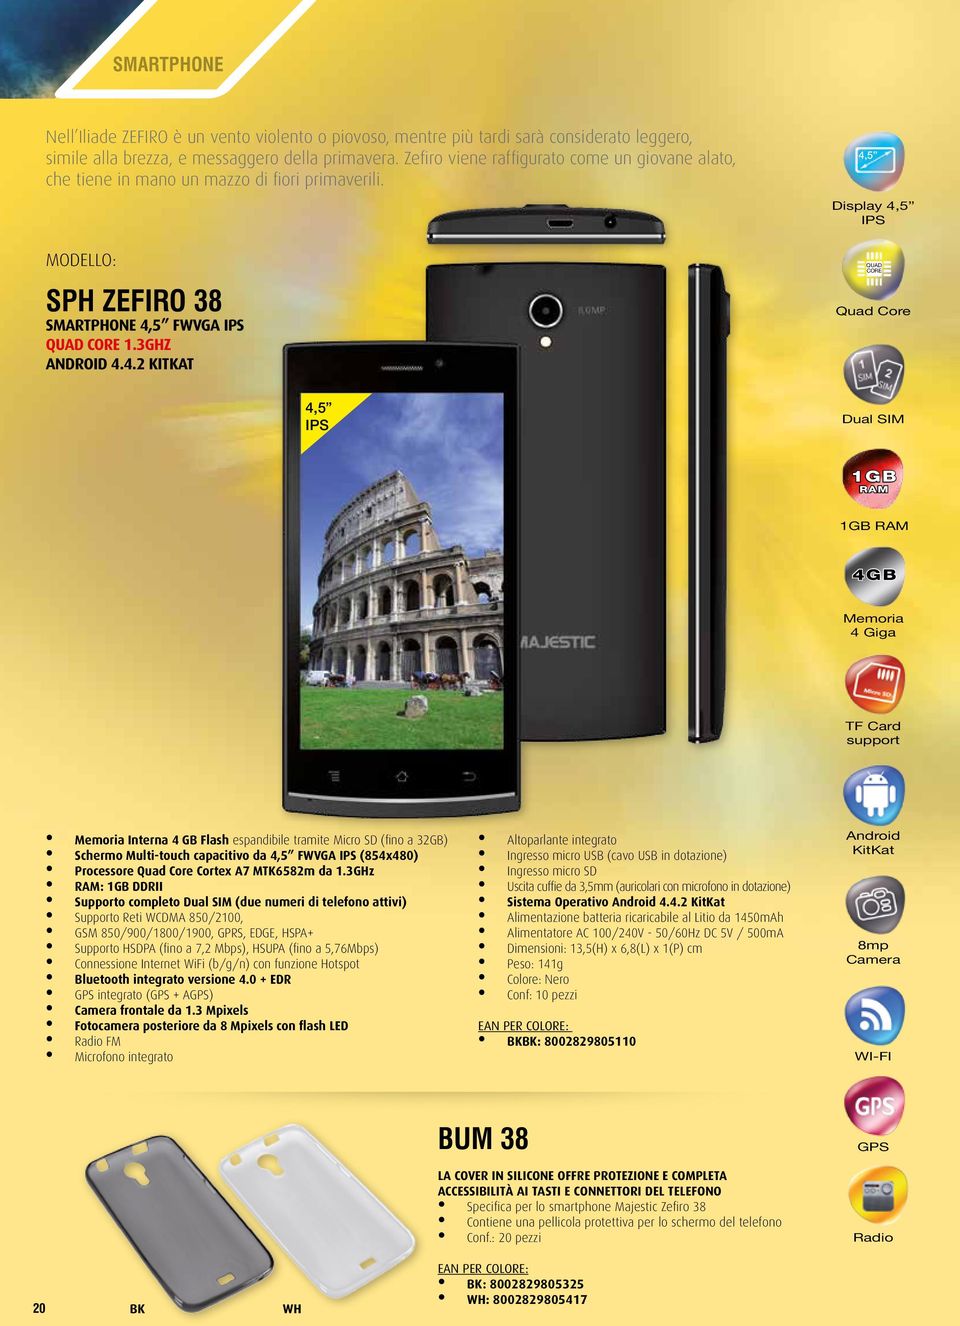 5 FWVGA IPS QUAD CORE 1.3GHZ ANDROID 4.